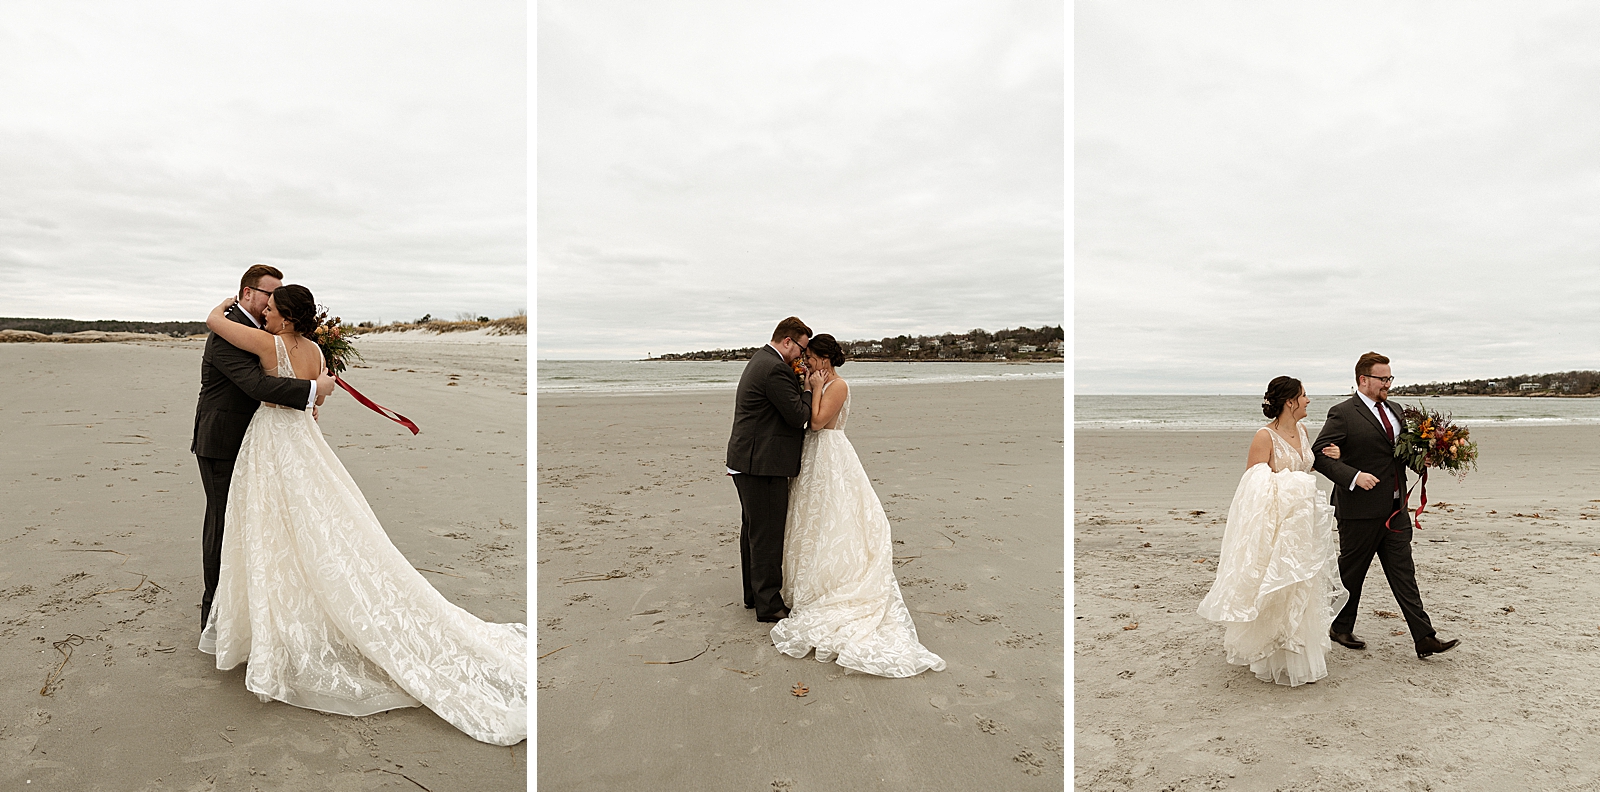 Emotional Bride and Groom hugging and walking on the sand together